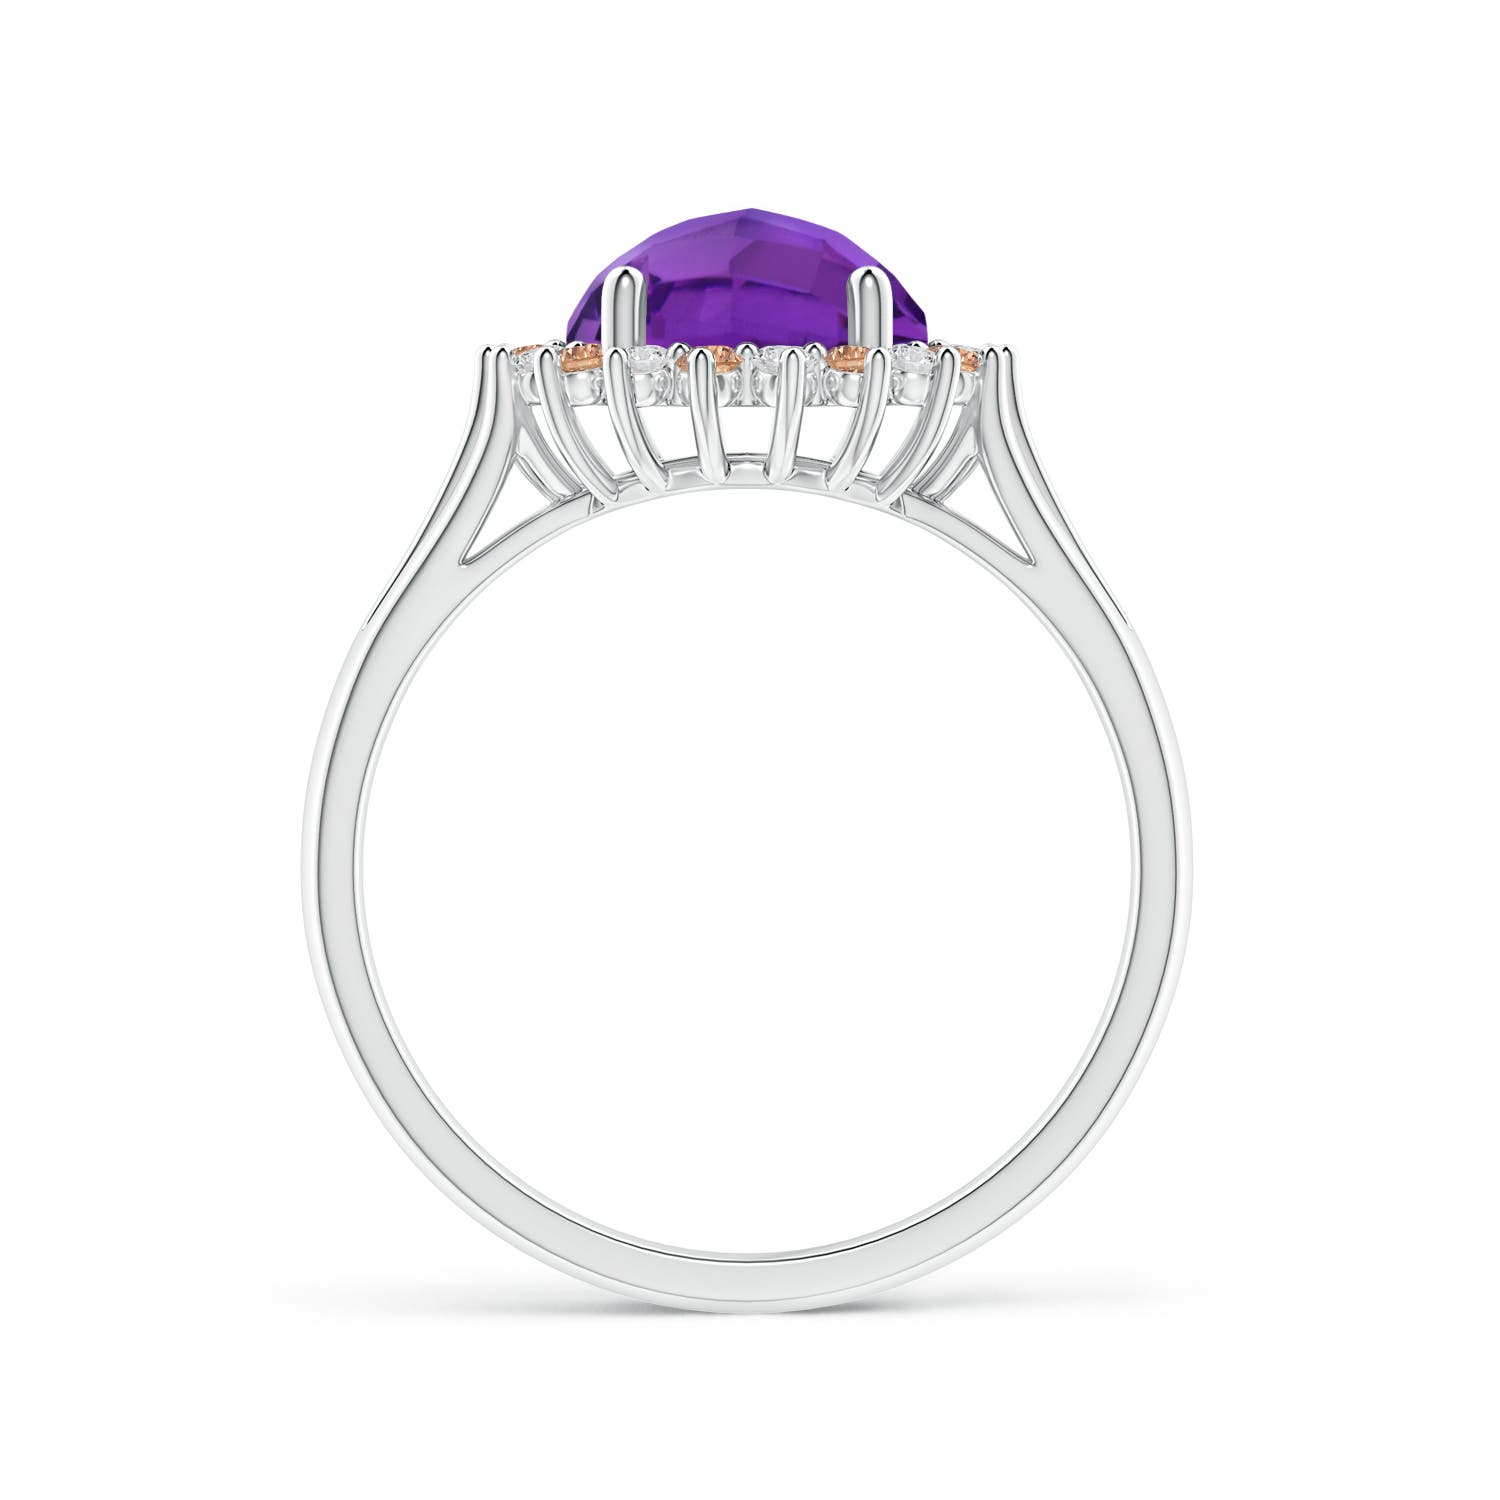 AAA - Amethyst / 2.1 CT / 14 KT White Gold